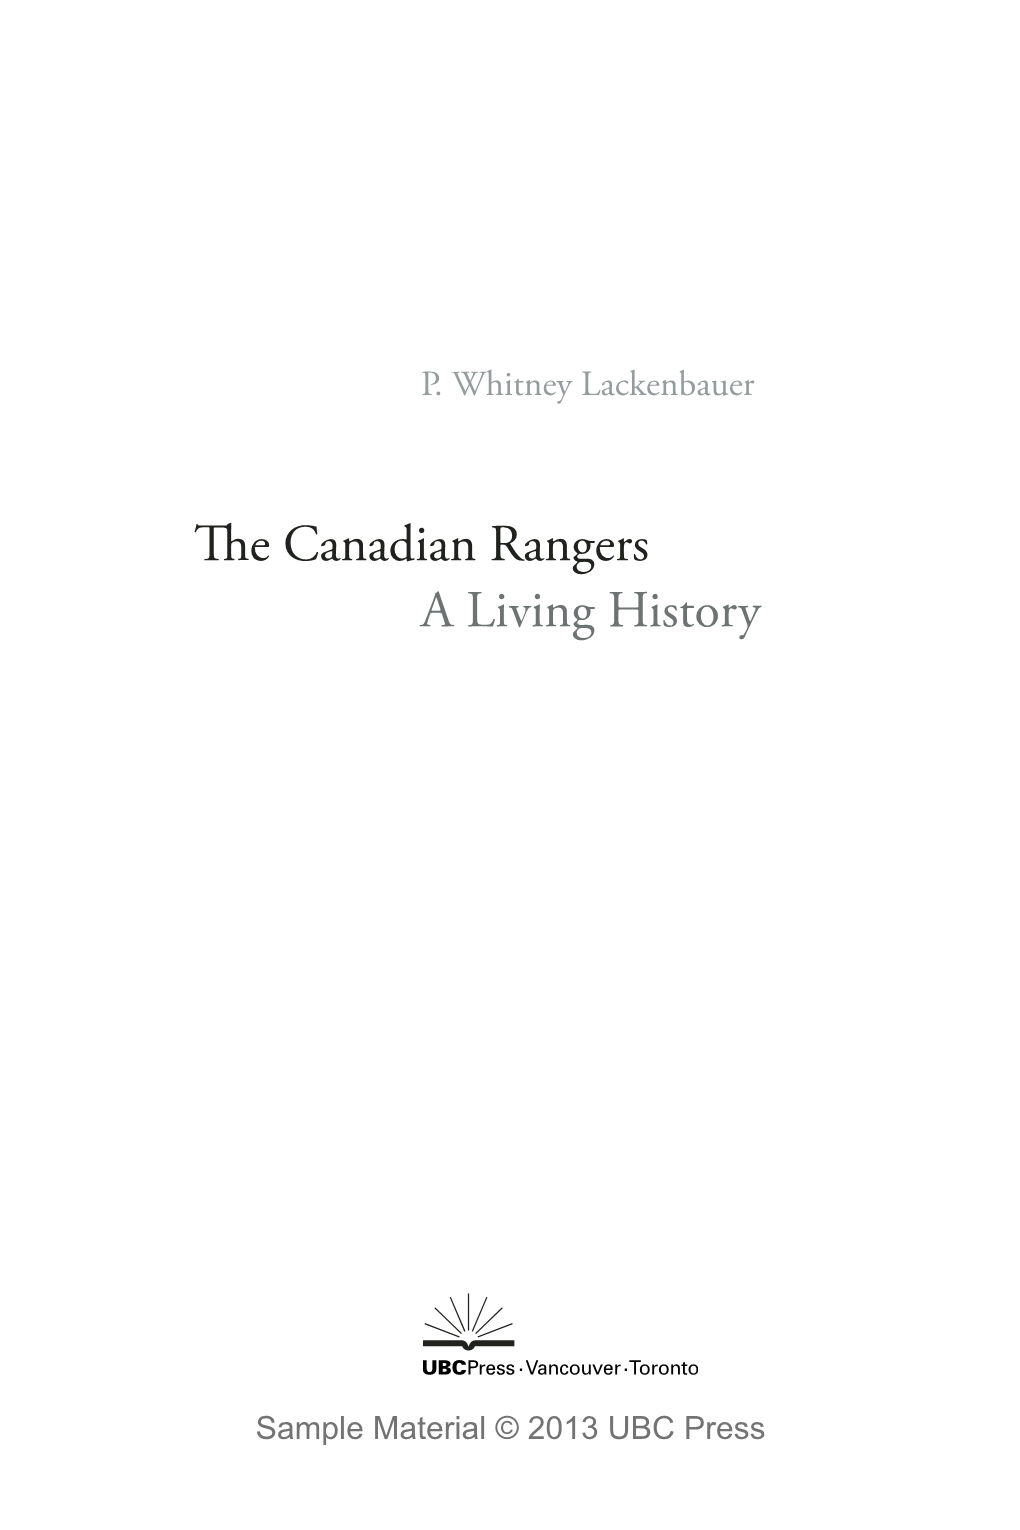 The Canadian Rangers a Living History